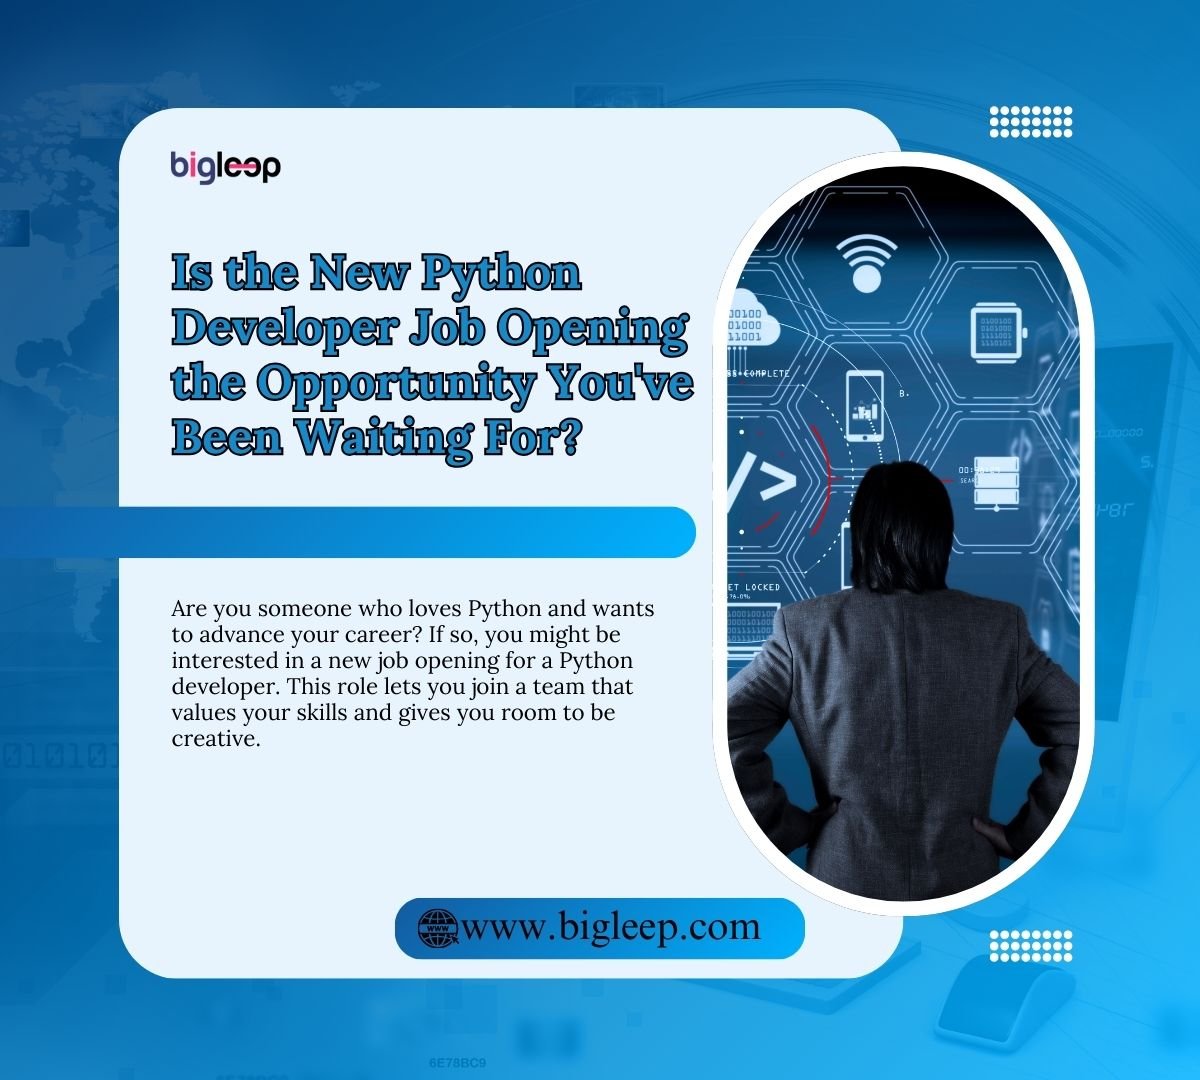 Is the New Python Developer Job Opening the Opportunity You've Been Waiting For?